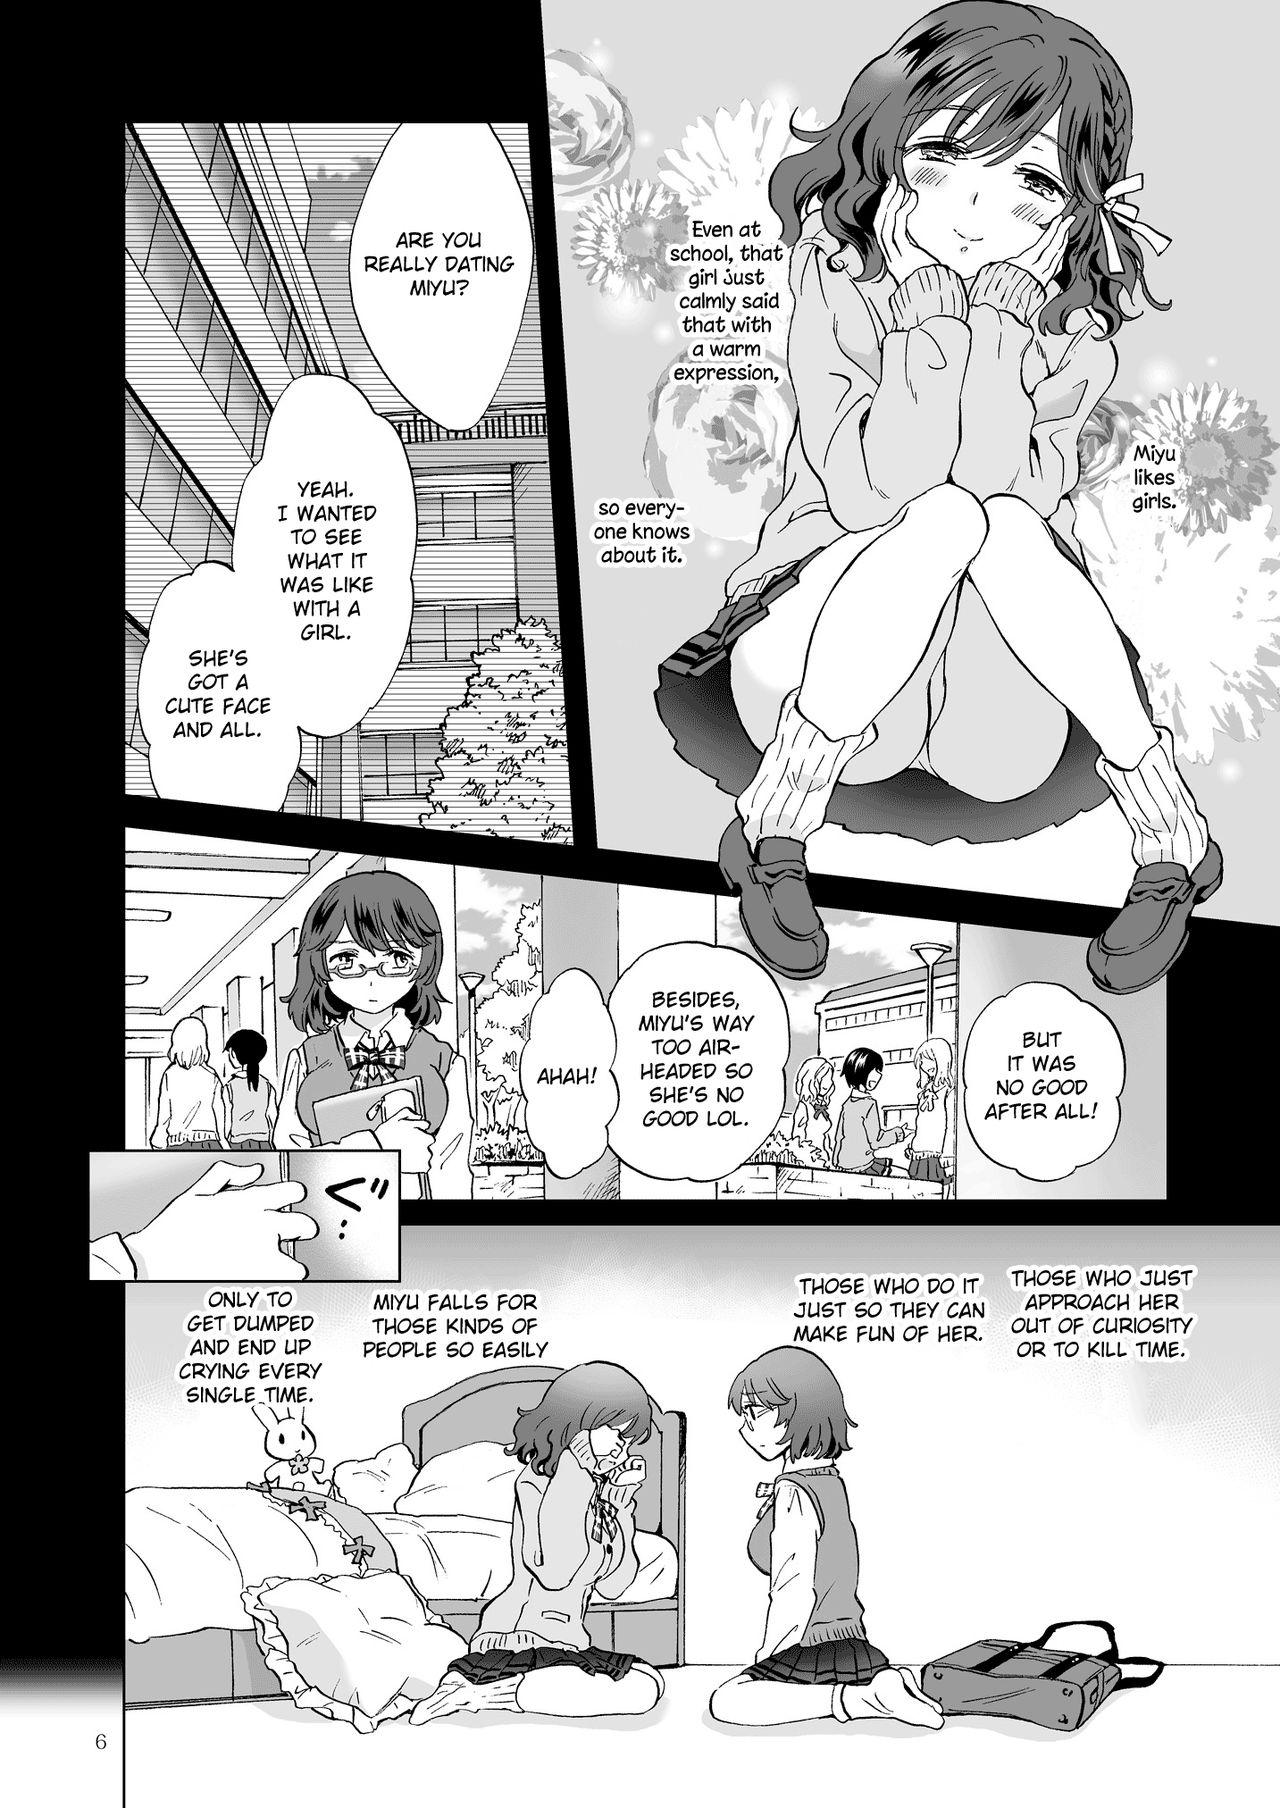 Girls Getting Fucked Heart Synchro - Original Egypt - Page 6